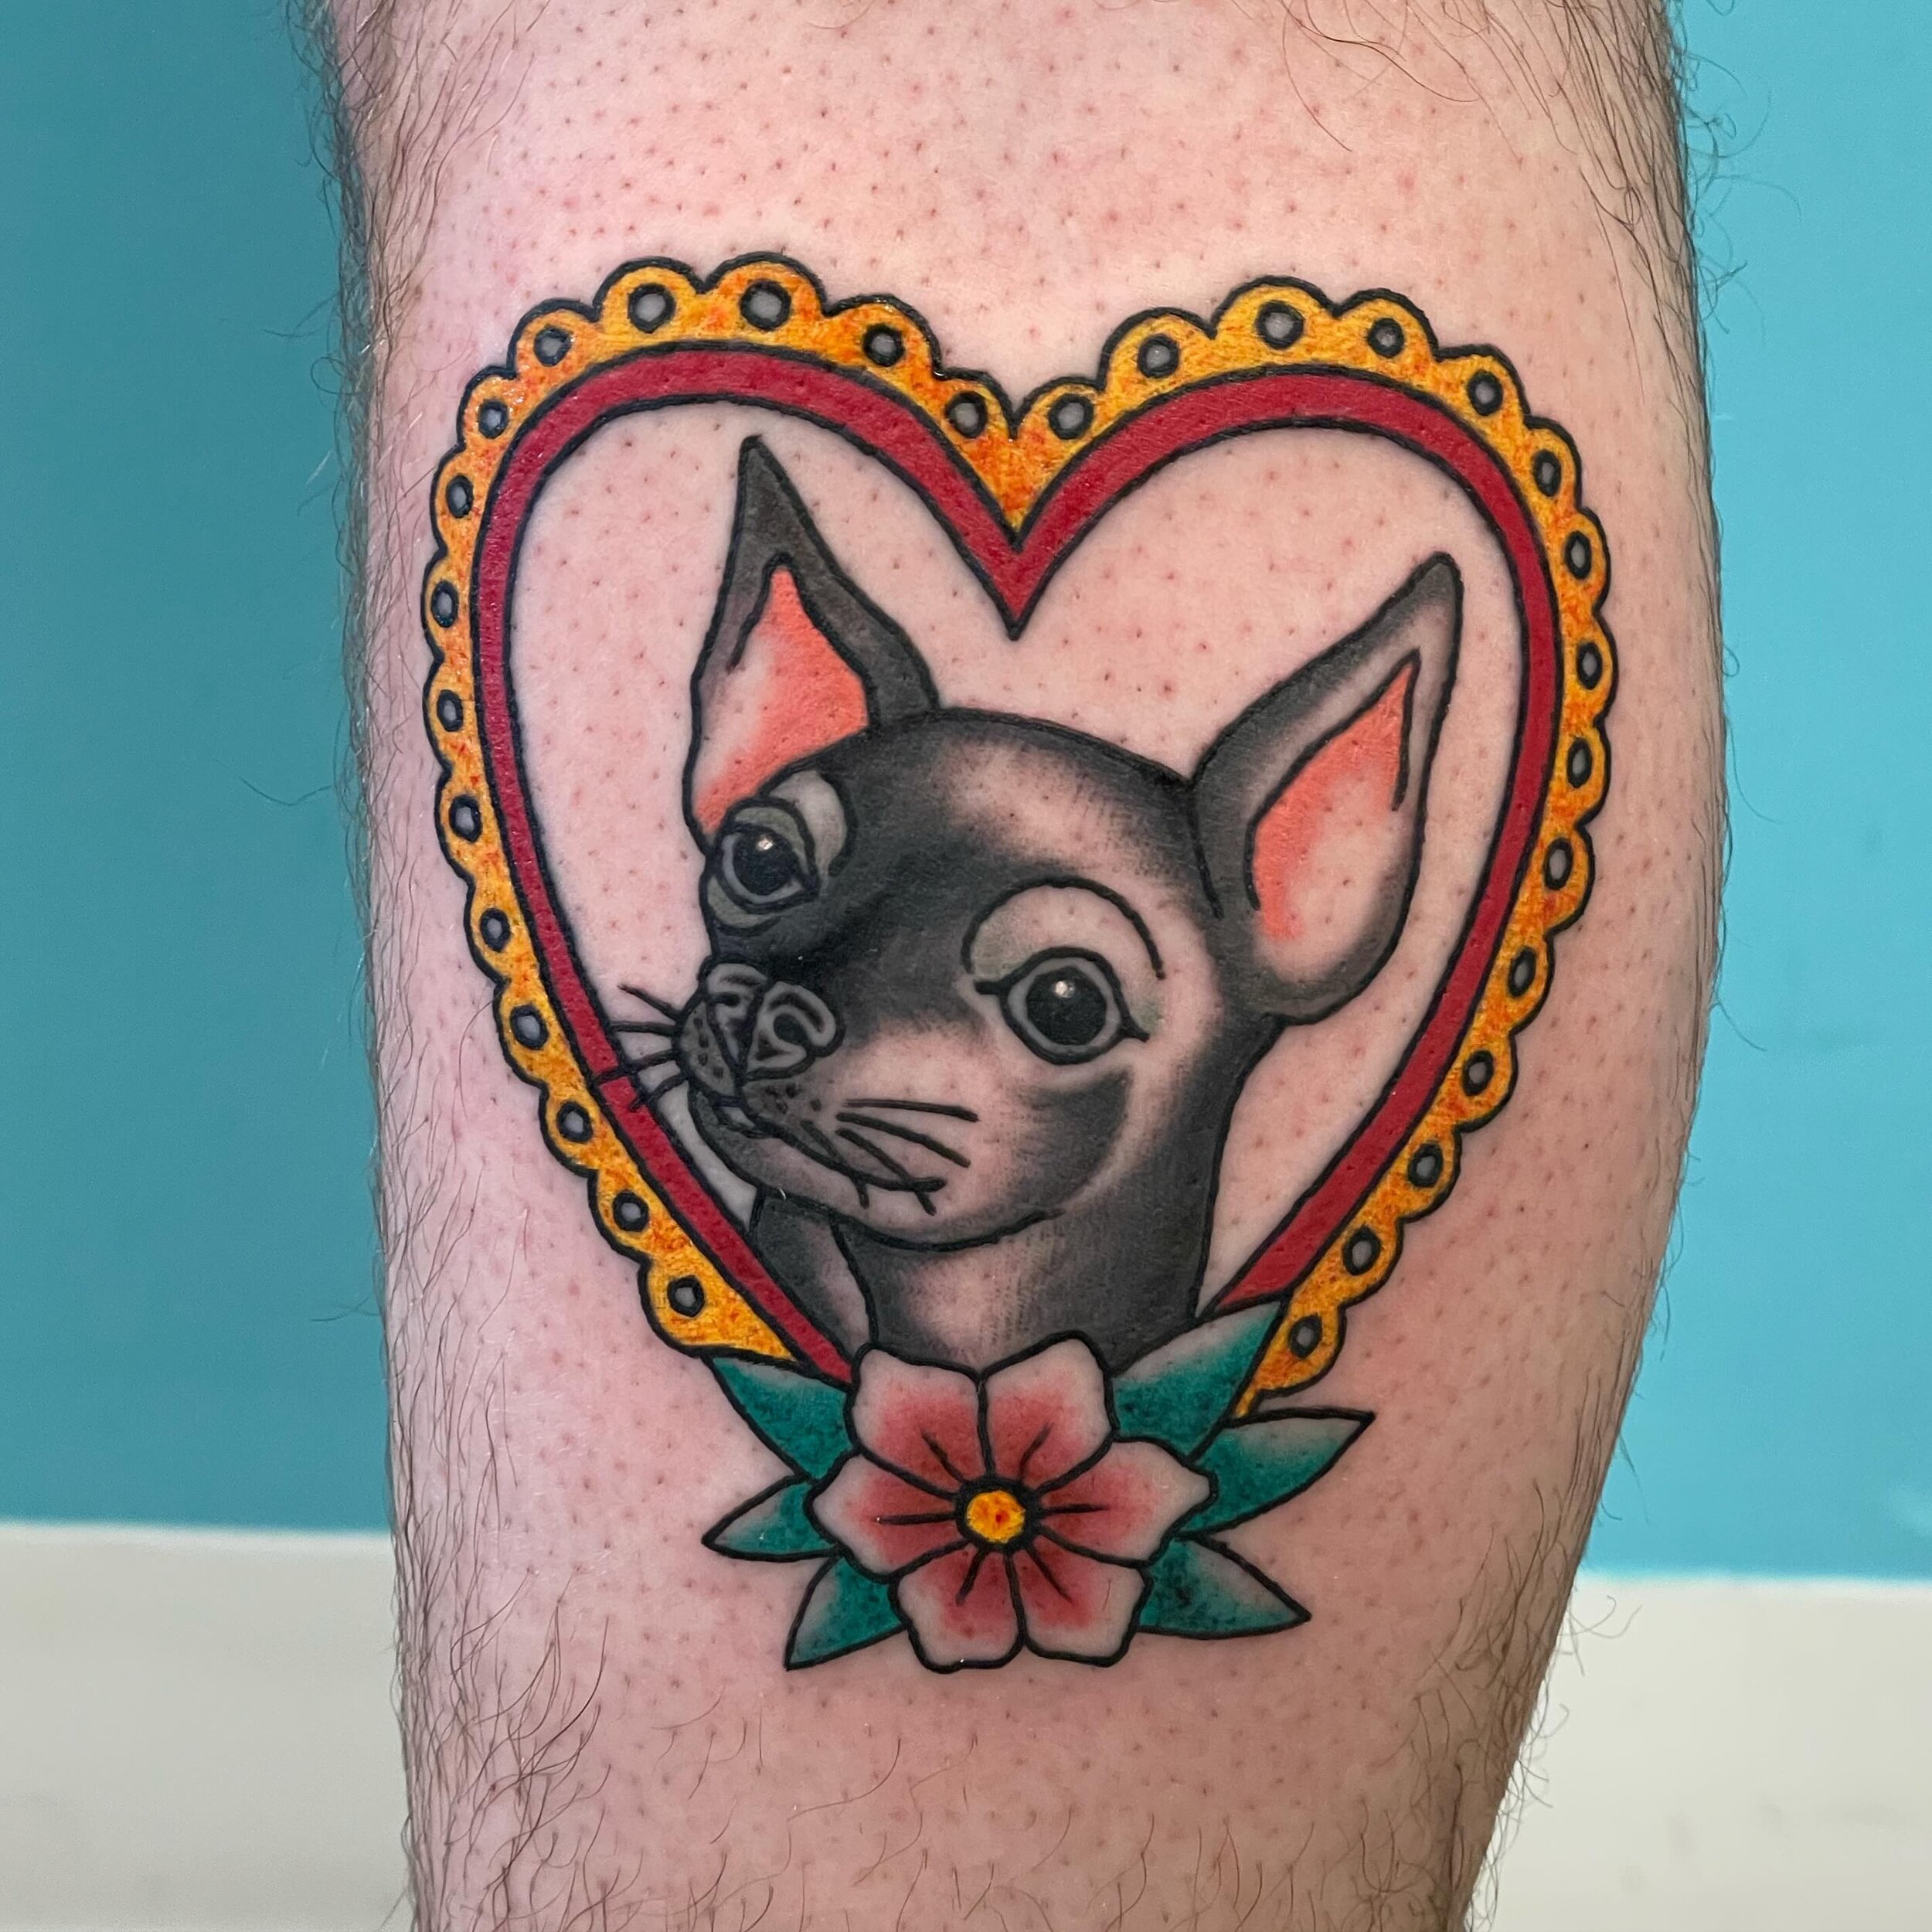 lil pet portrait

made by: @dusty.tat2 - To book with Dusty, fill out the form linked in their bio! 😎

#petportrait #barkbark #pettattoo